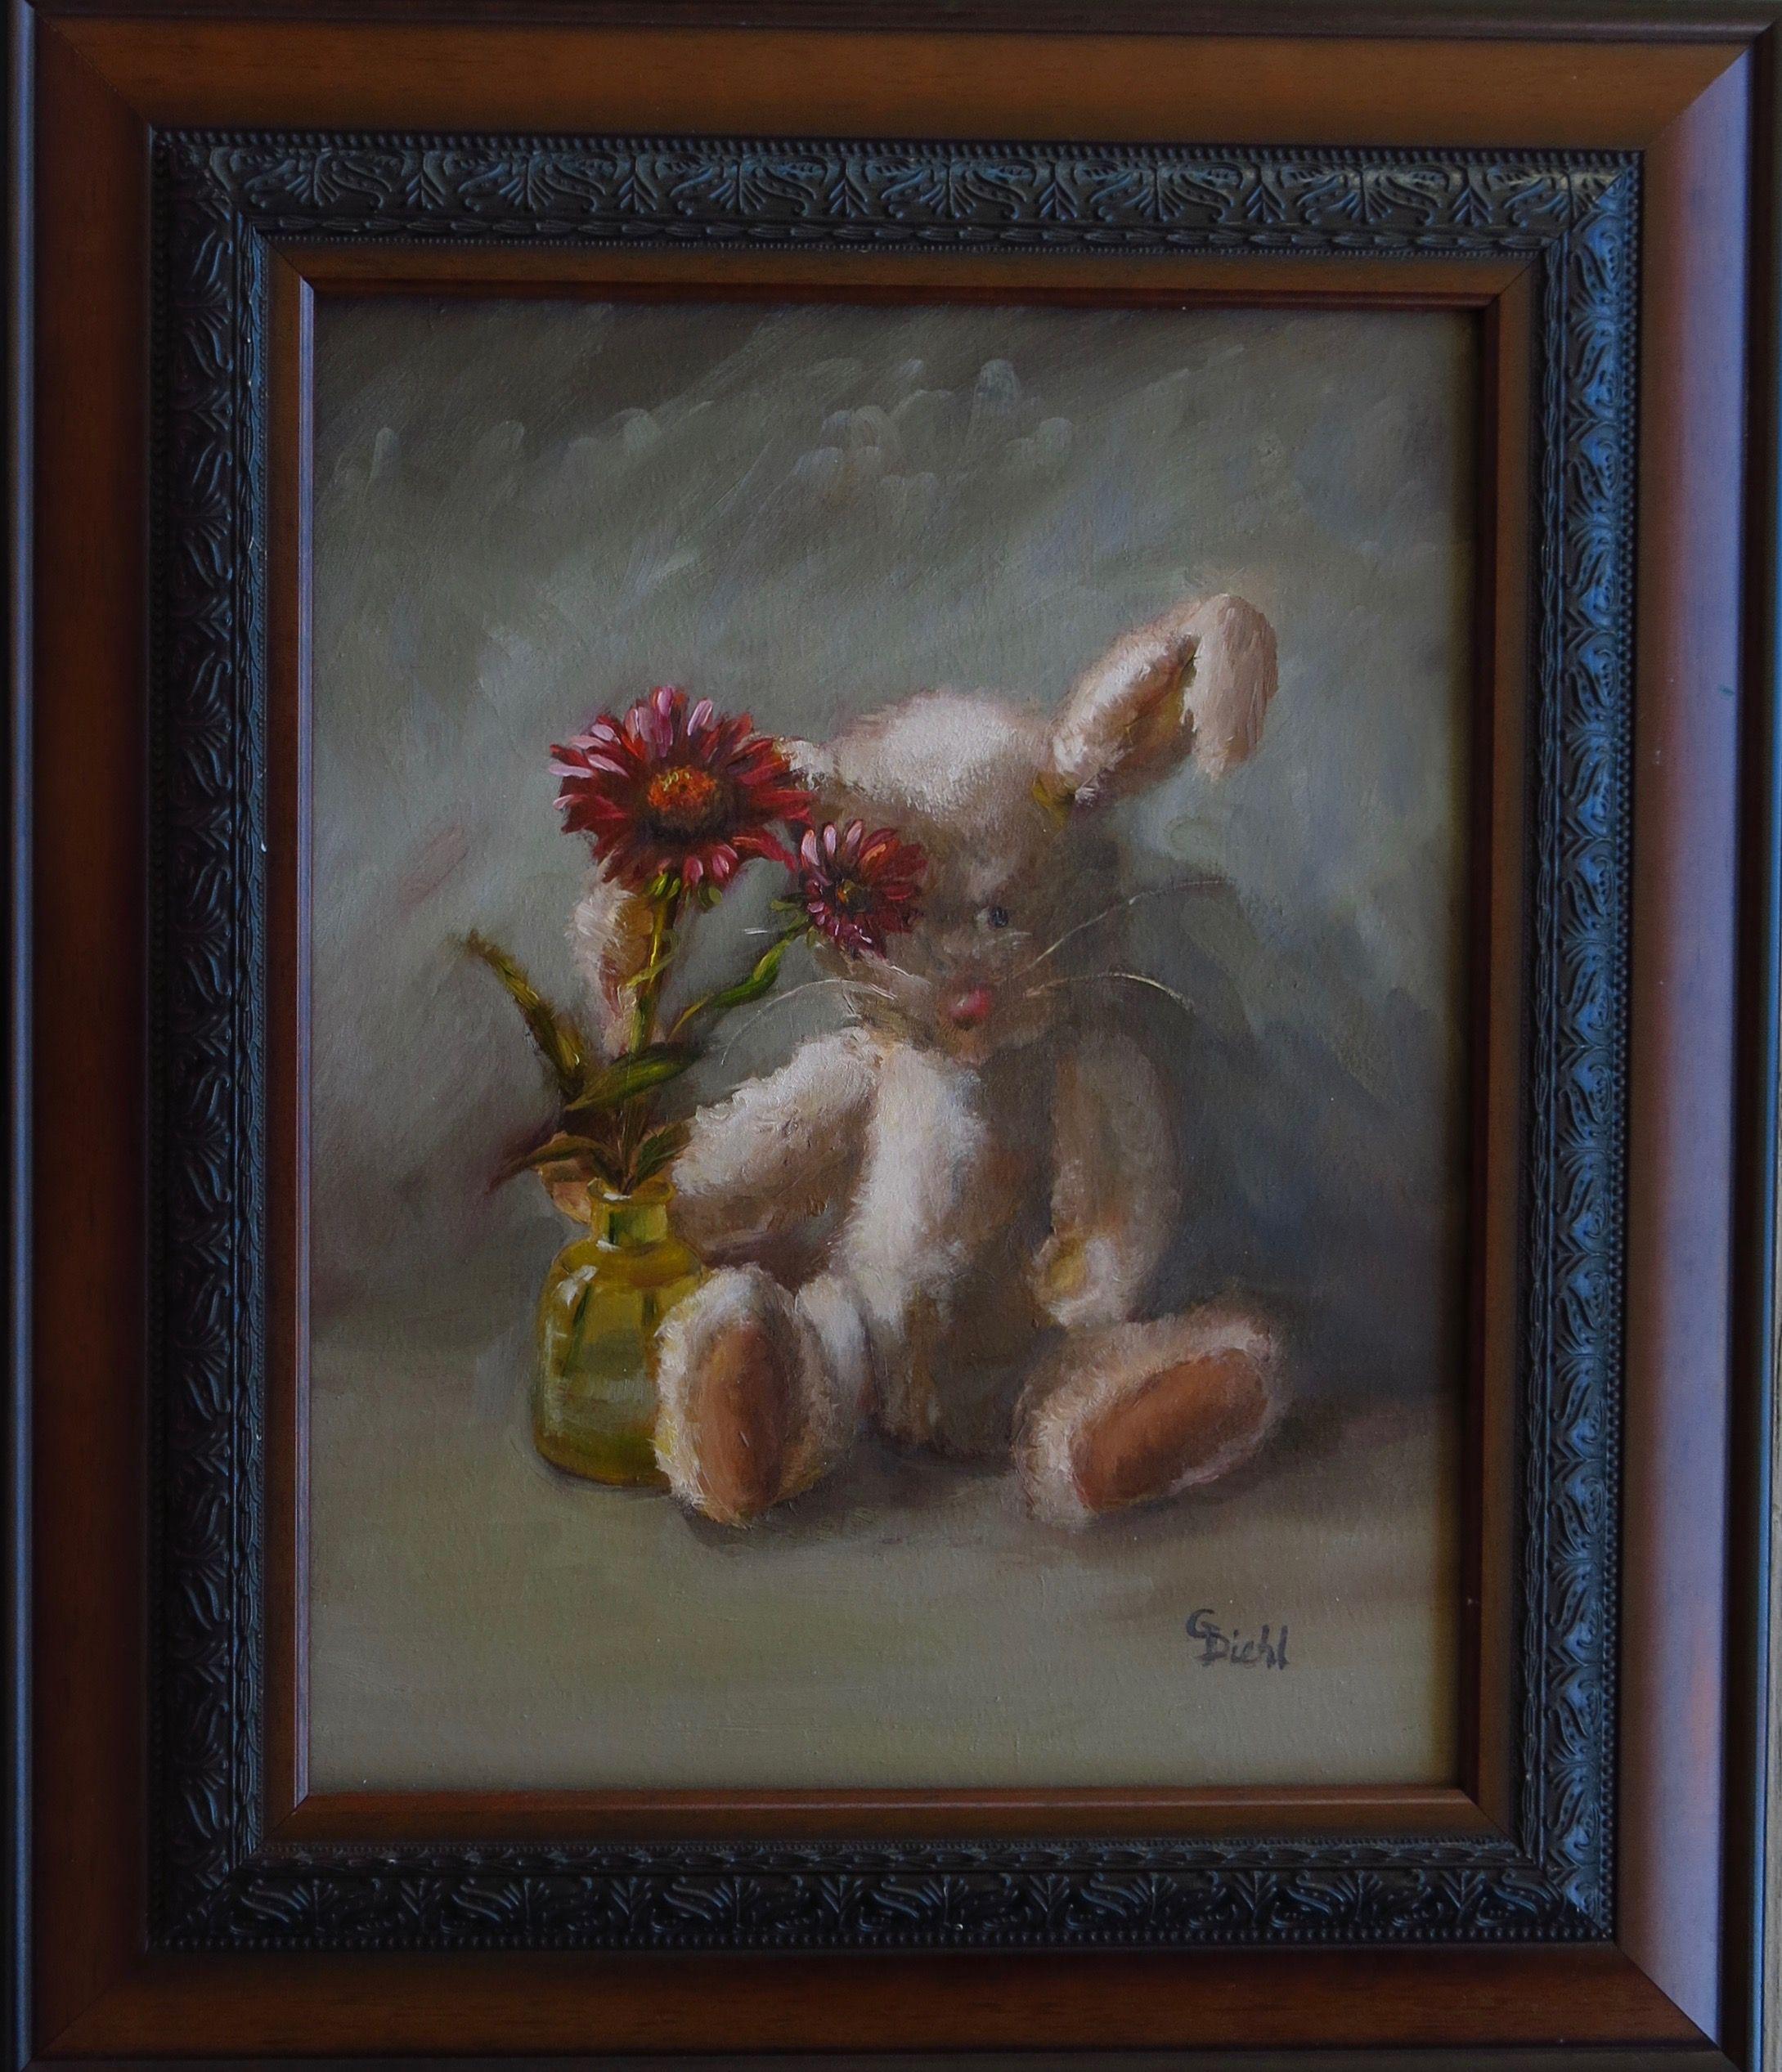 Bunny rabbit stuffed animal is seated next to bright red daisies. They have been painted in oils on a birch support and varnished. The frame used is solid wood. Please note that many frames have been used but not abused and are as represented in